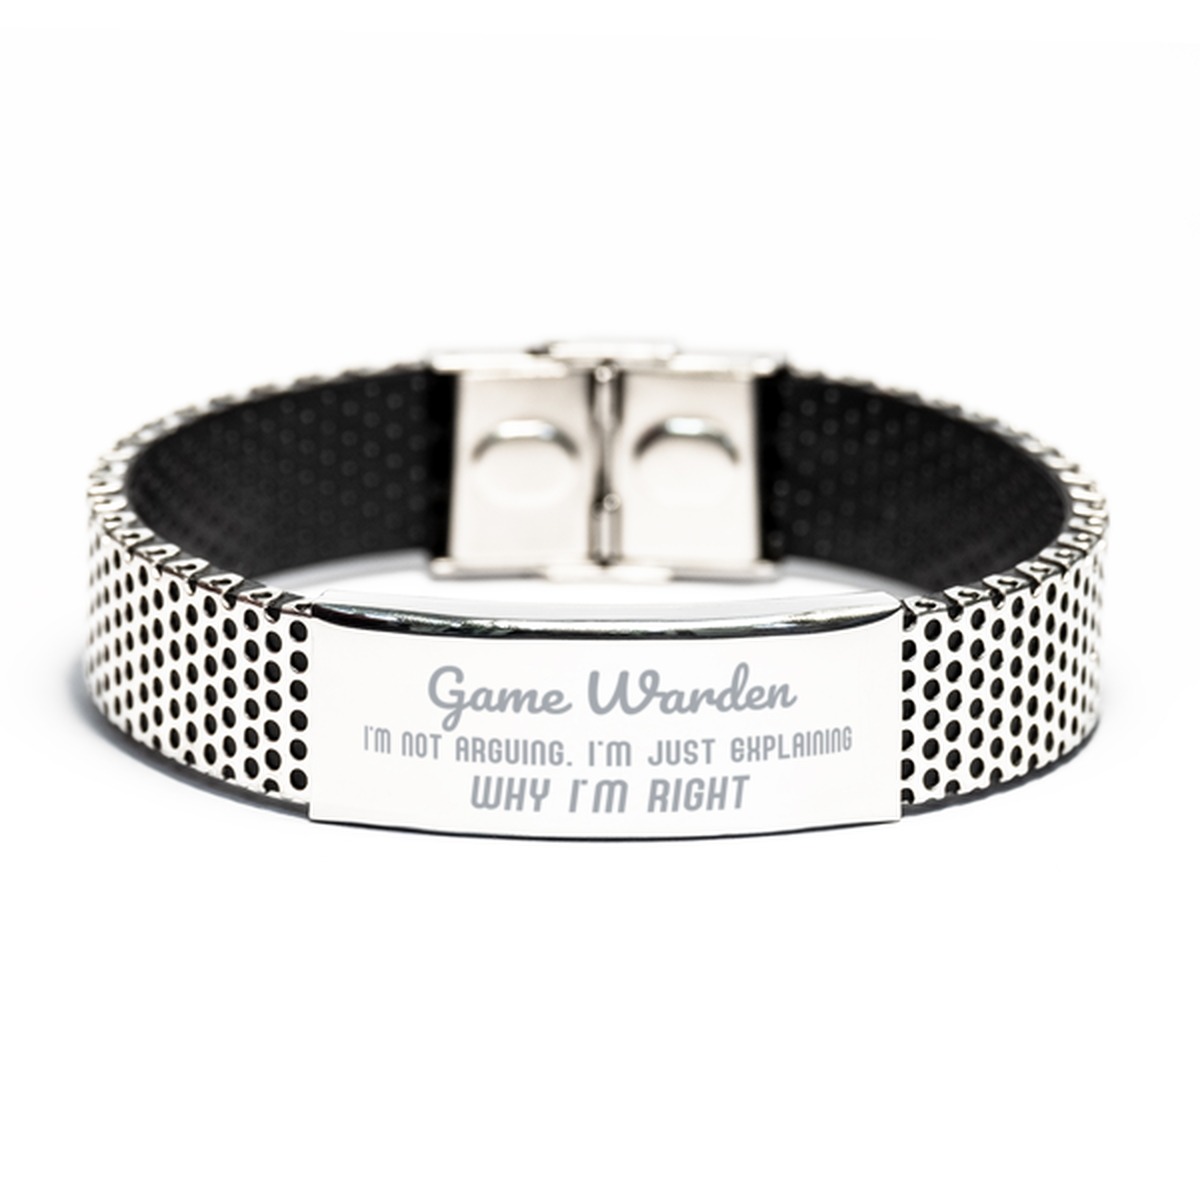 Game Warden I'm not Arguing. I'm Just Explaining Why I'm RIGHT Stainless Steel Bracelet, Funny Saying Quote Game Warden Gifts For Game Warden Graduation Birthday Christmas Gifts for Men Women Coworker